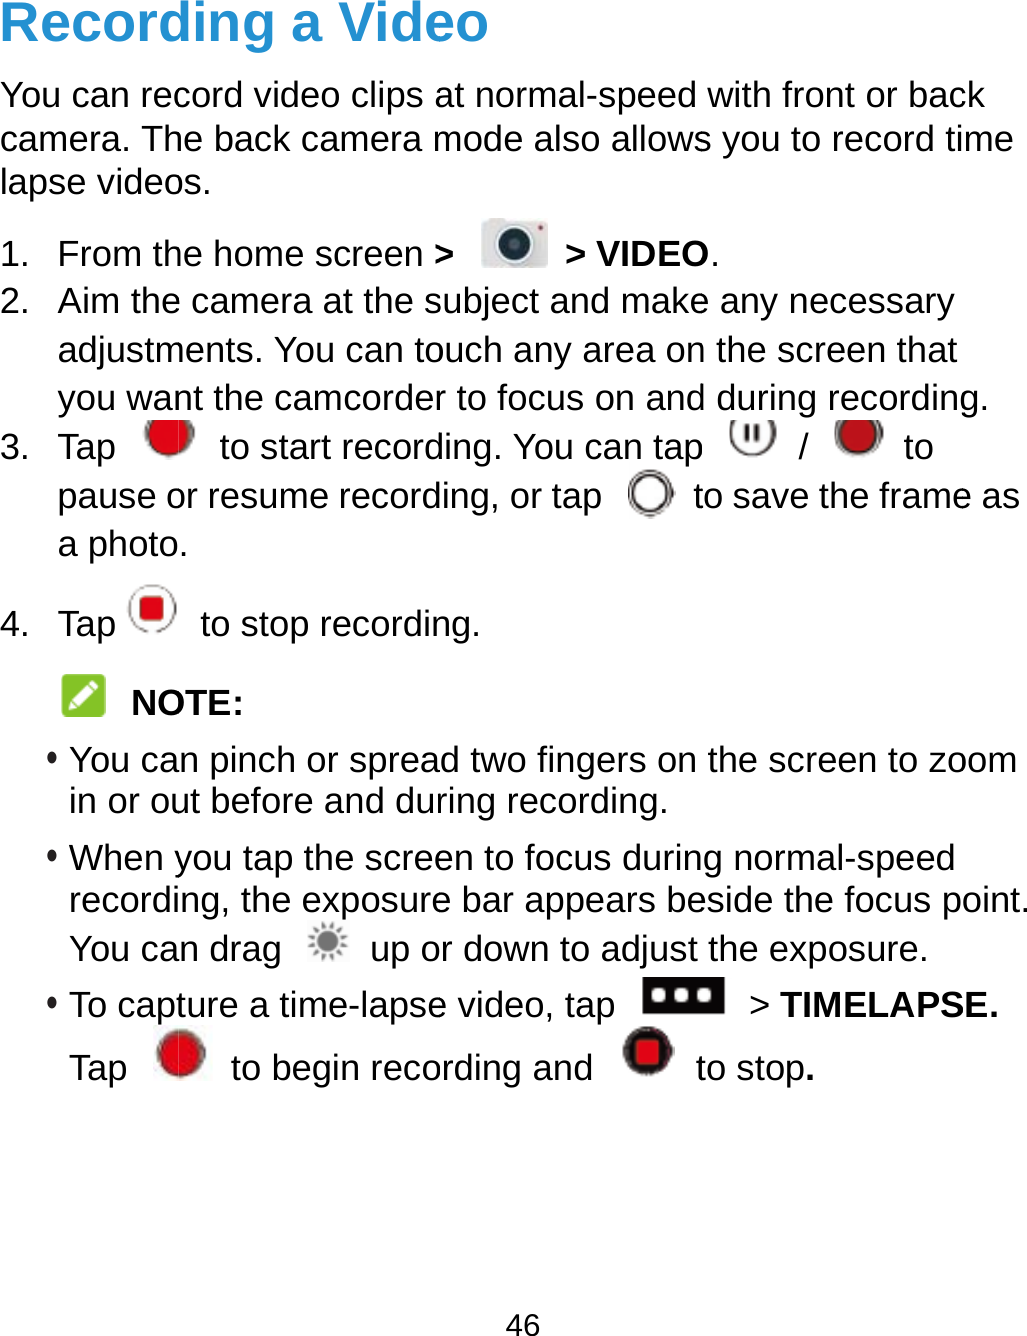  RecordYou can reccamera. Thlapse video1. From th2. Aim theadjustmyou wan3. Tap pause oa photo4. Tap NO• You cain or ou• When yrecordiYou ca• To captTap ding a Videcord video clips ahe back camera mos. he home screen &gt;e camera at the sments. You can tont the camcorder  to start recordor resume record.  to stop recordinOTE: n pinch or spreaut before and duryou tap the screeng, the exposuren drag    up oture a time-lapse to begin reco46 eo at normal-speedmode also allows&gt;  &gt; VIDEOsubject and makeouch any area onr to focus on andding. You can taping, or tap   tng. d two fingers on ring recording.en to focus durine bar appears ber down to adjust e video, tap ording and   twith front or bacs you to record tiO. e any necessary n the screen that d during recordingp  /  to to save the framethe screen to zog normal-speedeside the focus pthe exposure.  &gt; TIMELAPSto stop. ck me  g. e as oom oint. SE. 